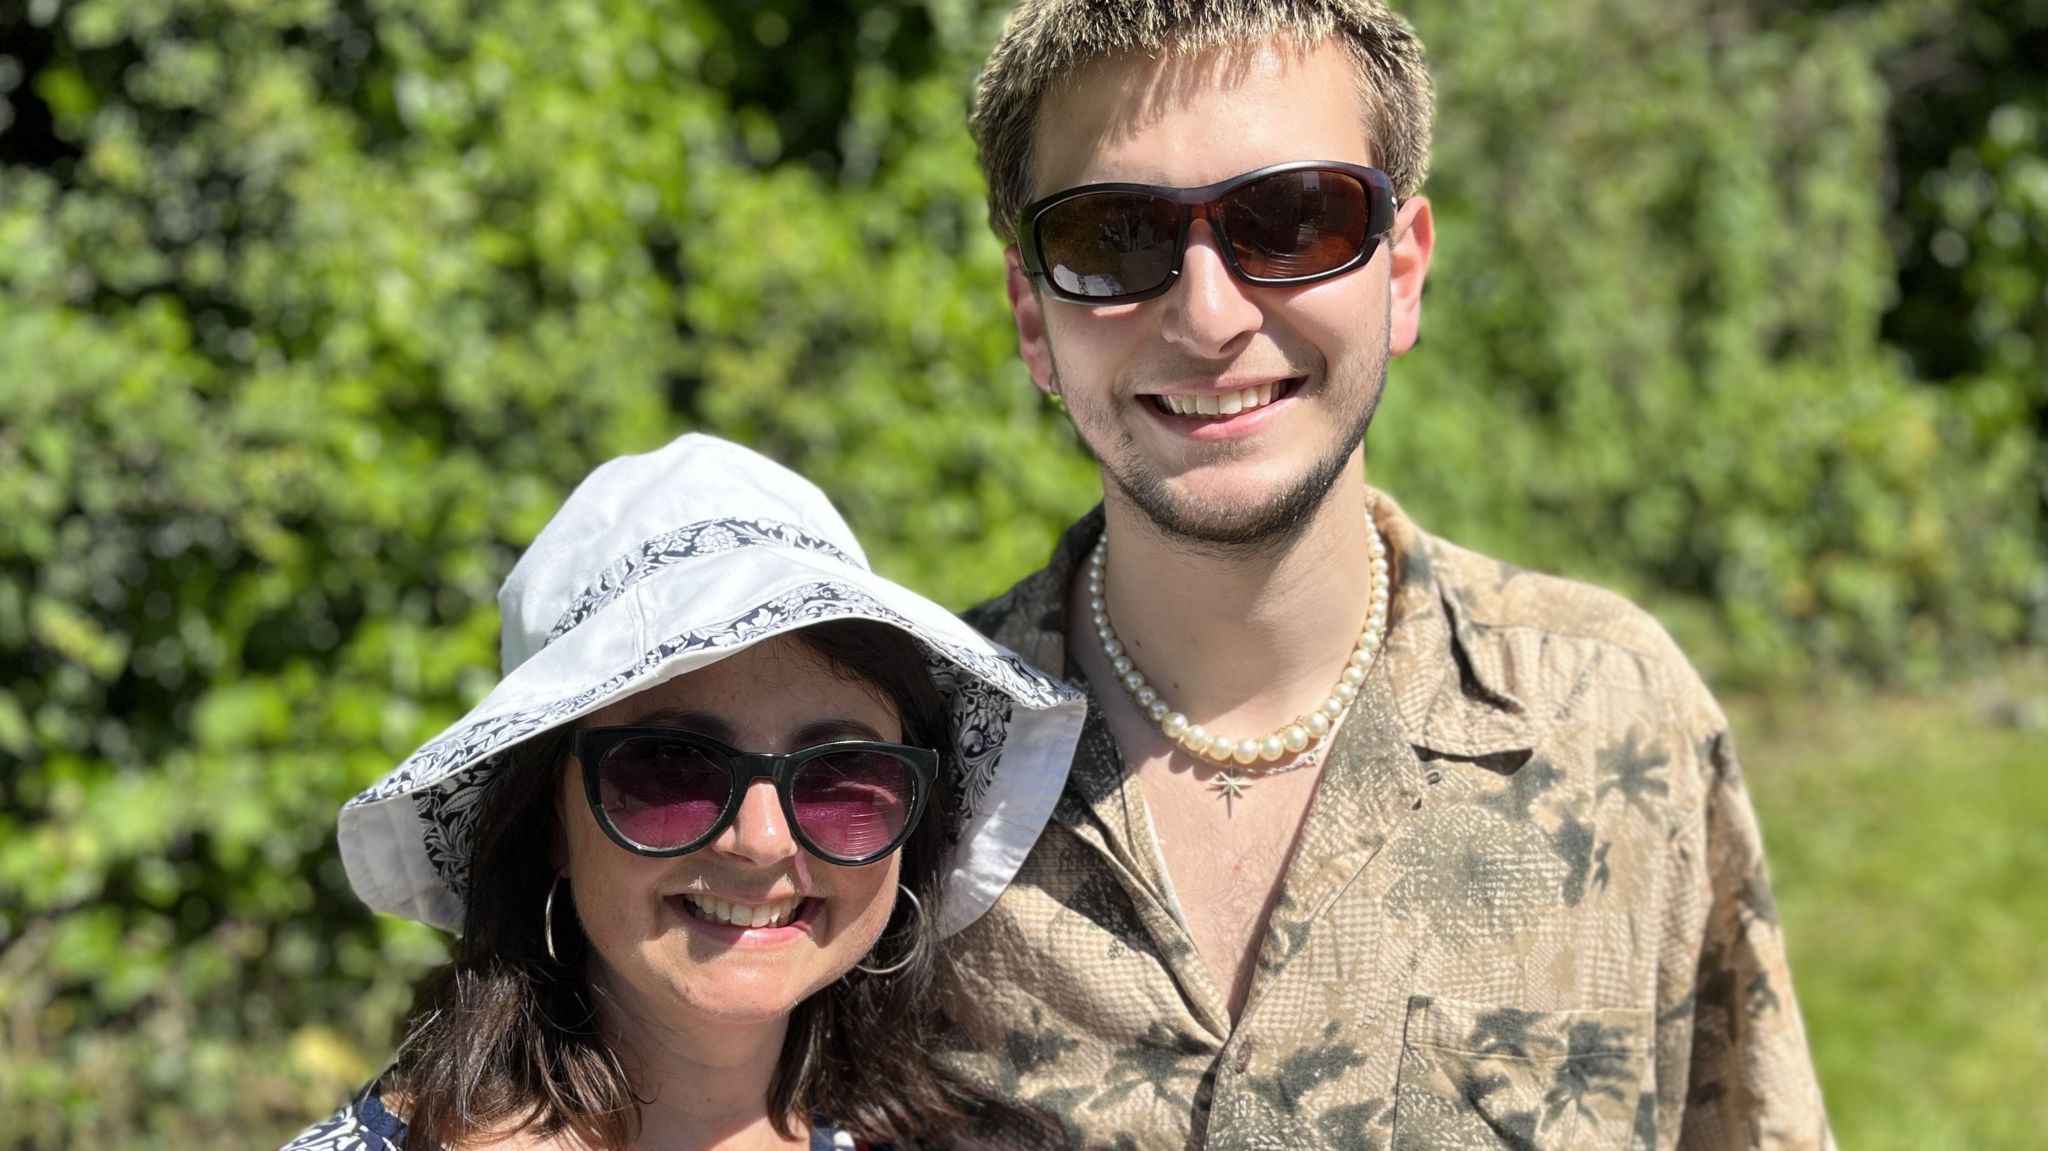 Mother and son, Rachel Huntley and Zac Lewis, smiling, both wearing sunglasses